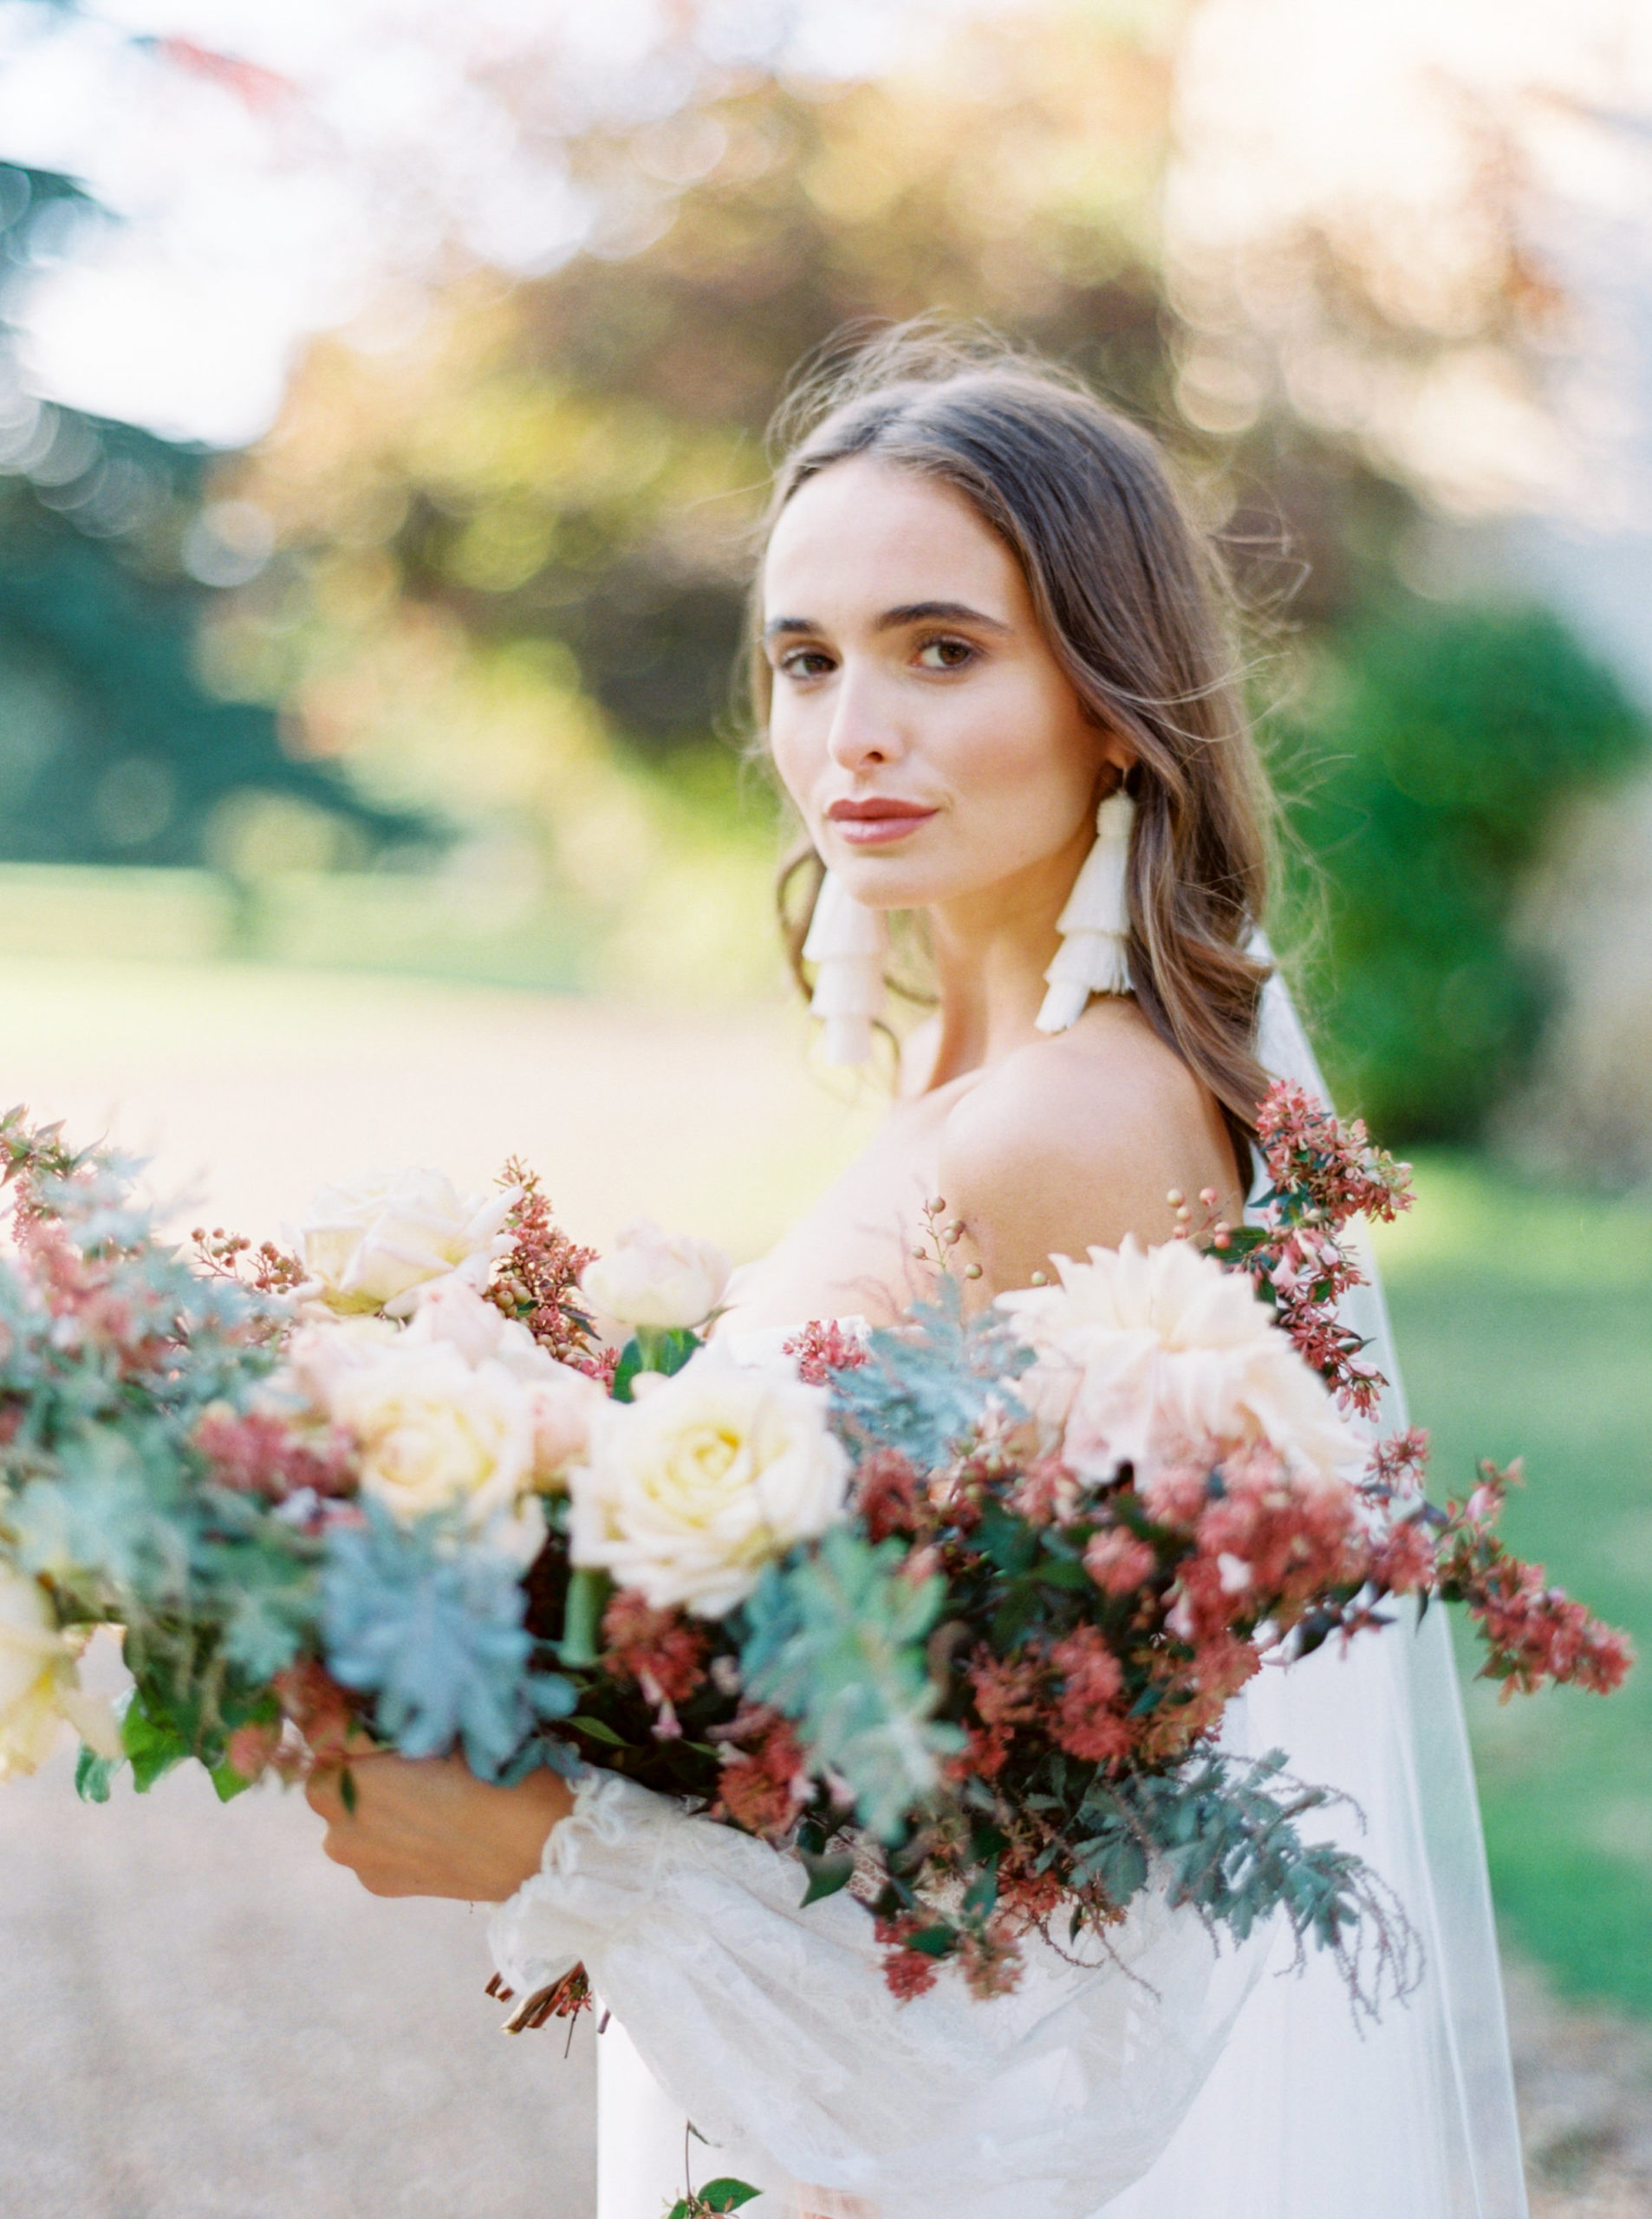 Bride gazing at the camera enchantingly while holding her stunning bouquet of flowers, taken by Mackenzie Reiter